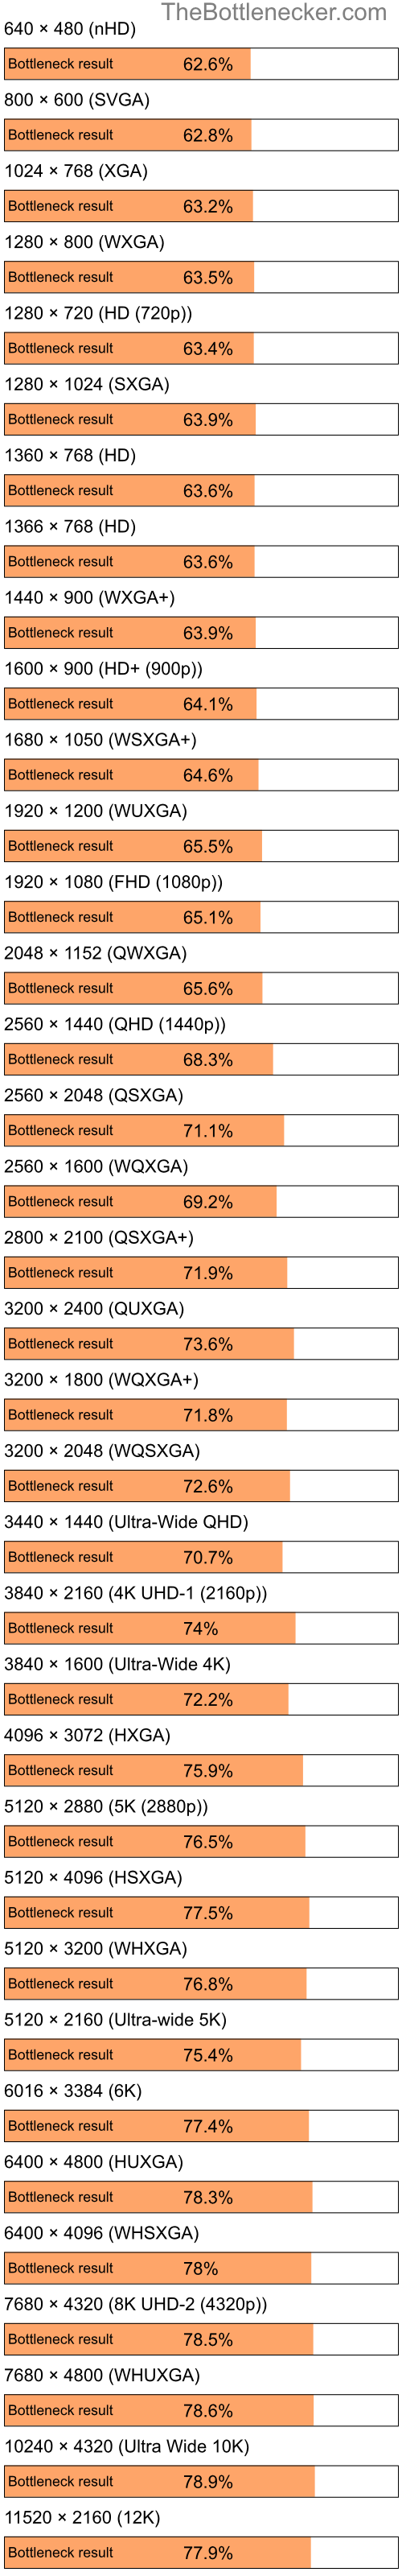 Bottleneck results by resolution for Intel Pentium 4 and AMD Radeon 2100 in Processor Intense Tasks